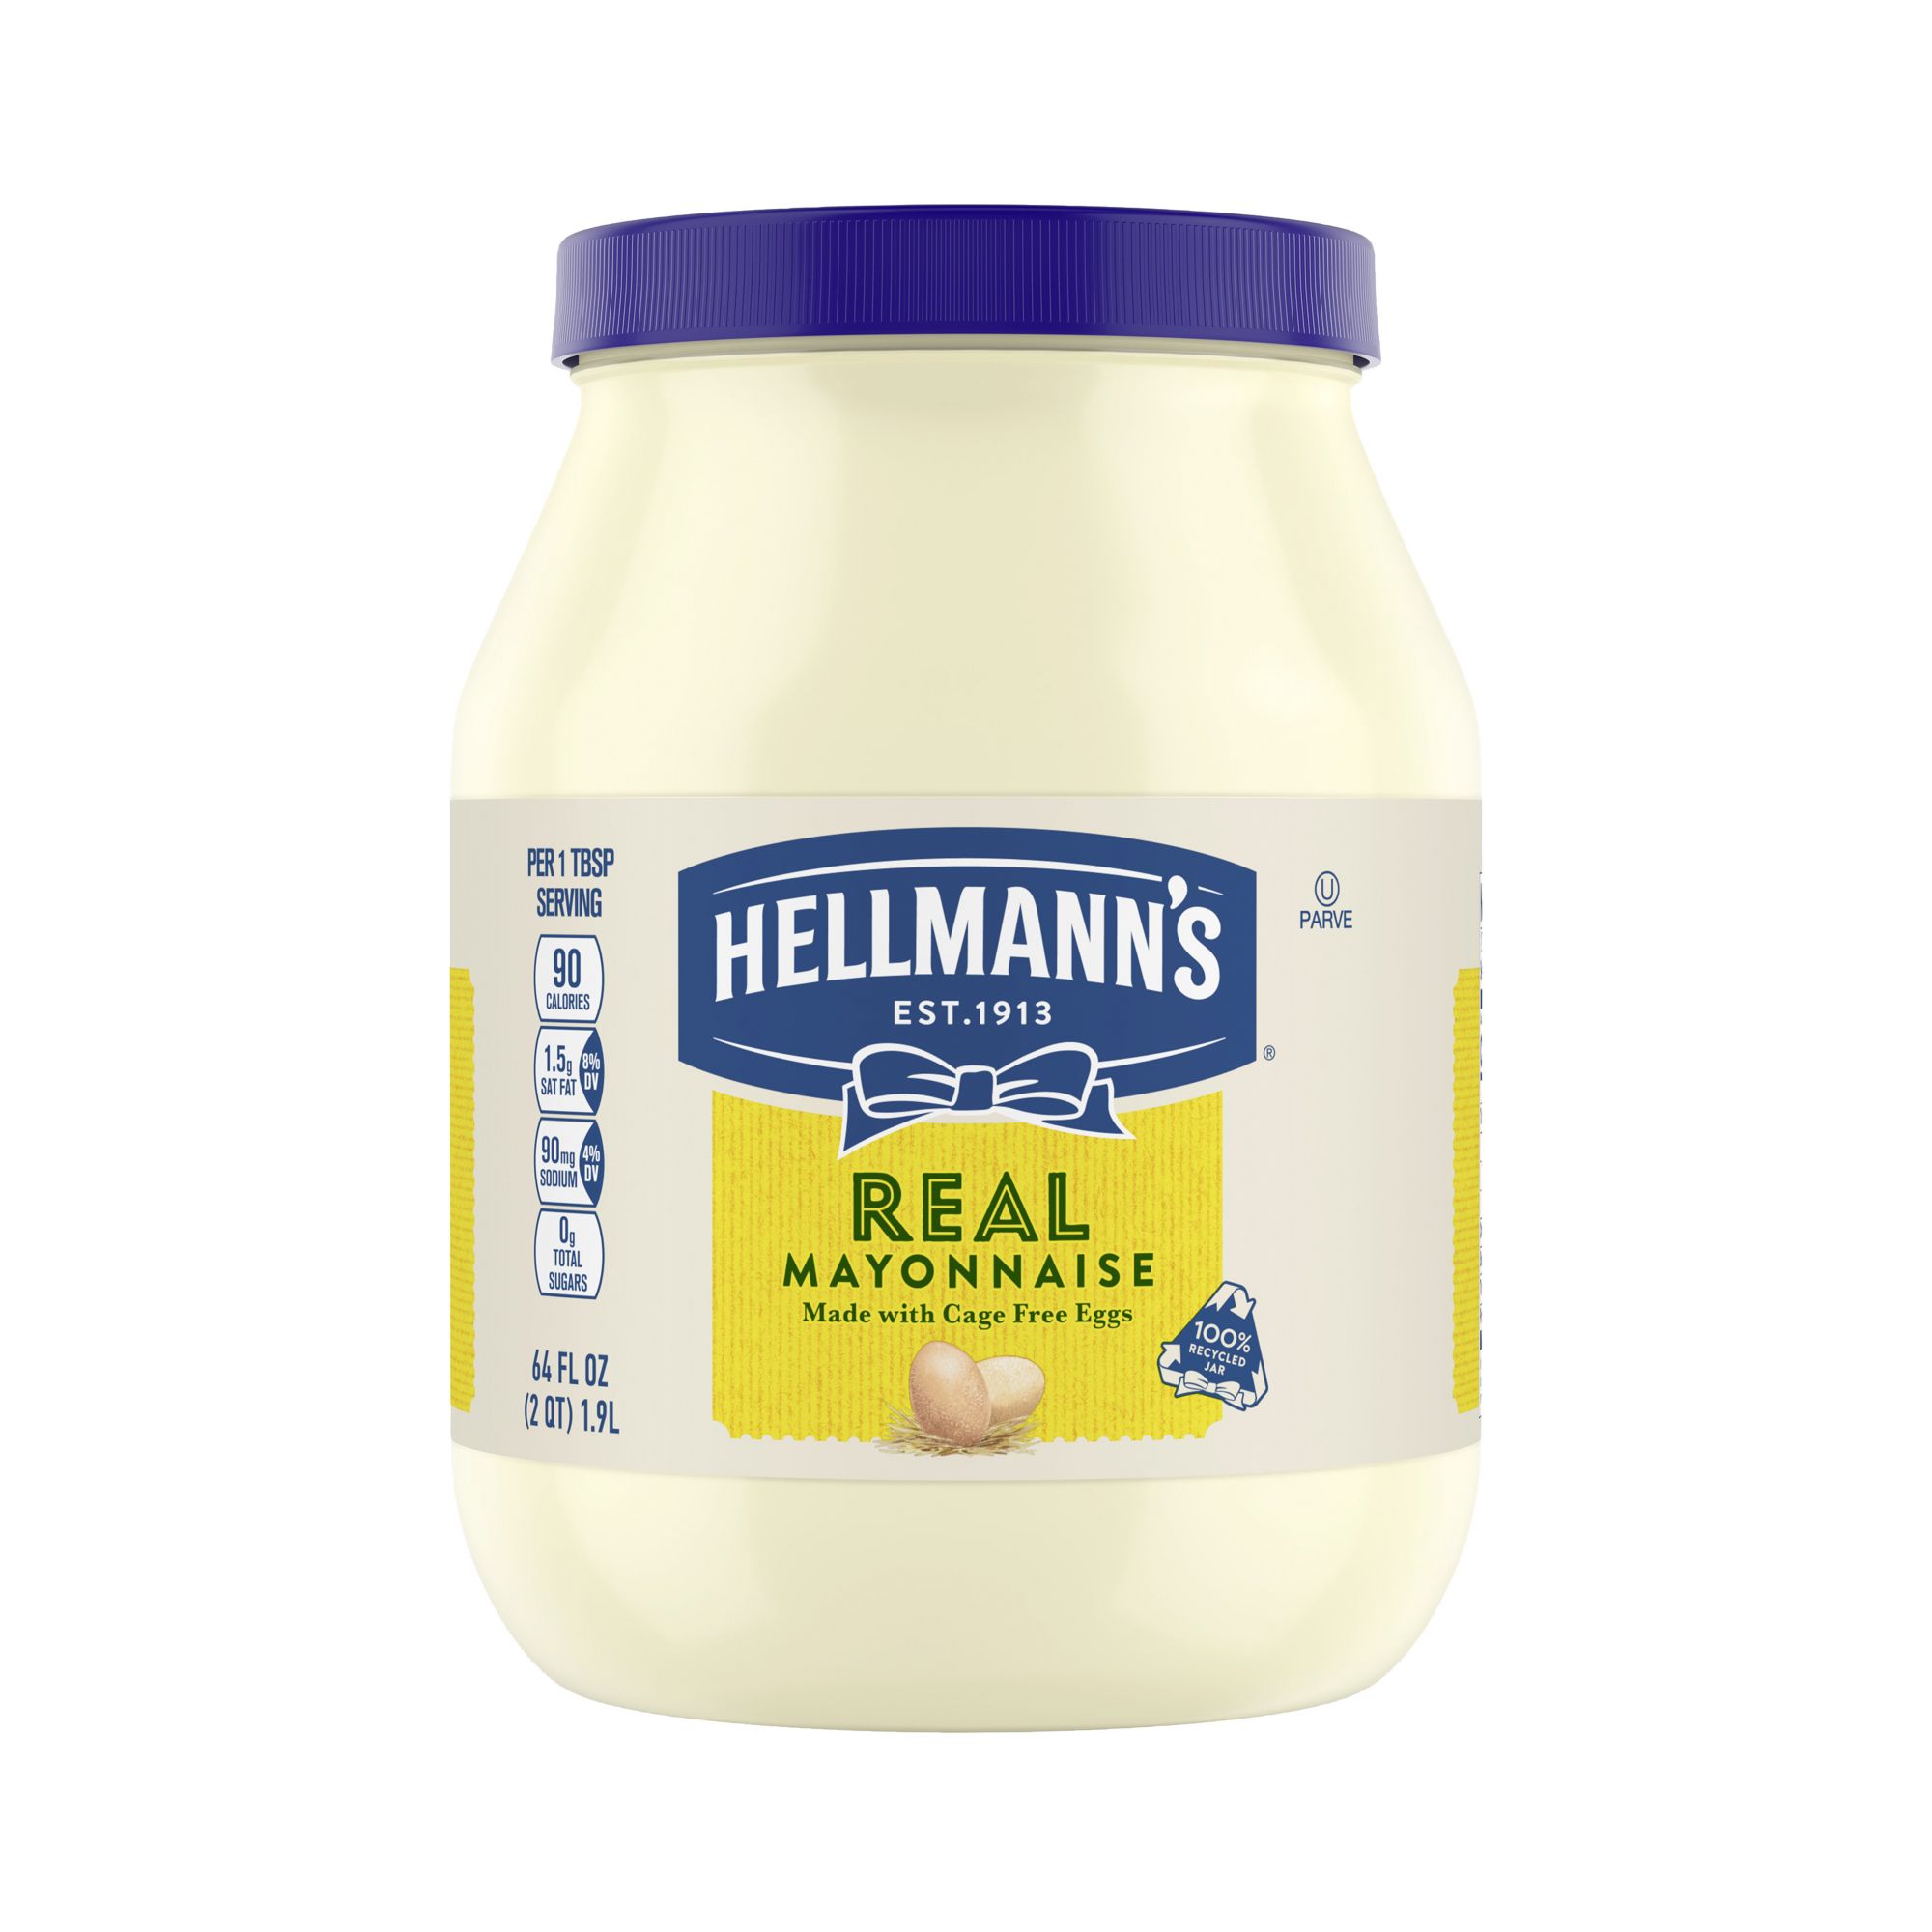 Hellmann's Mayonnaise Real Mayo 30 oz (Pack of 6)